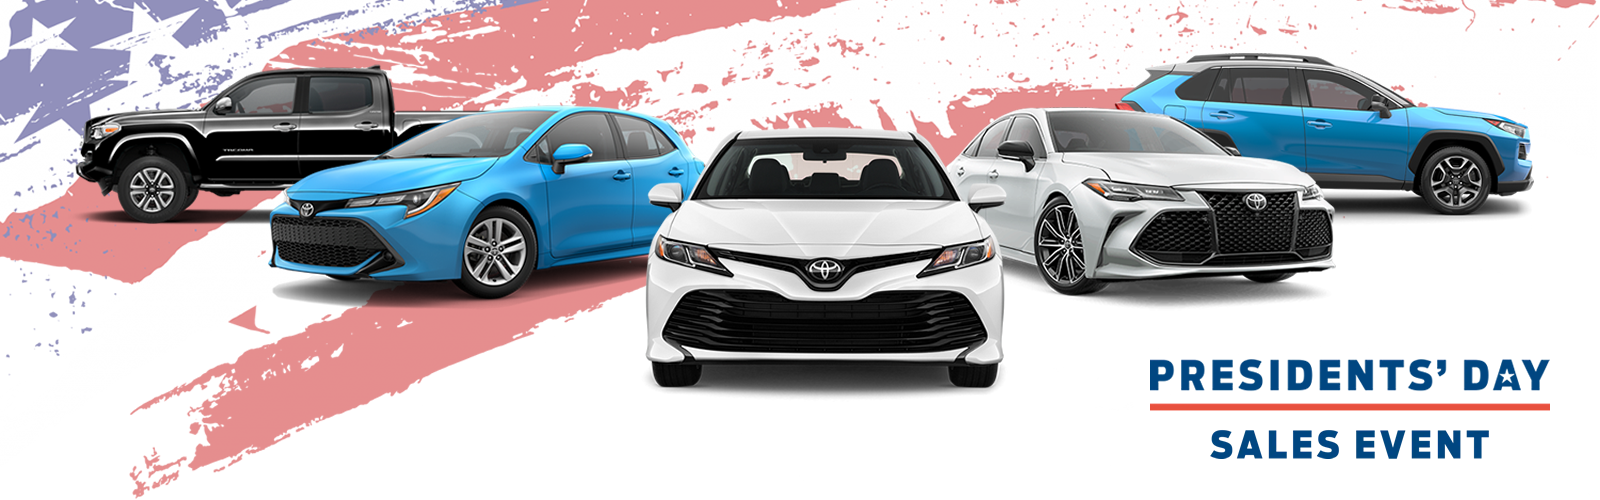 Toyota Presidents' Day Sales Event